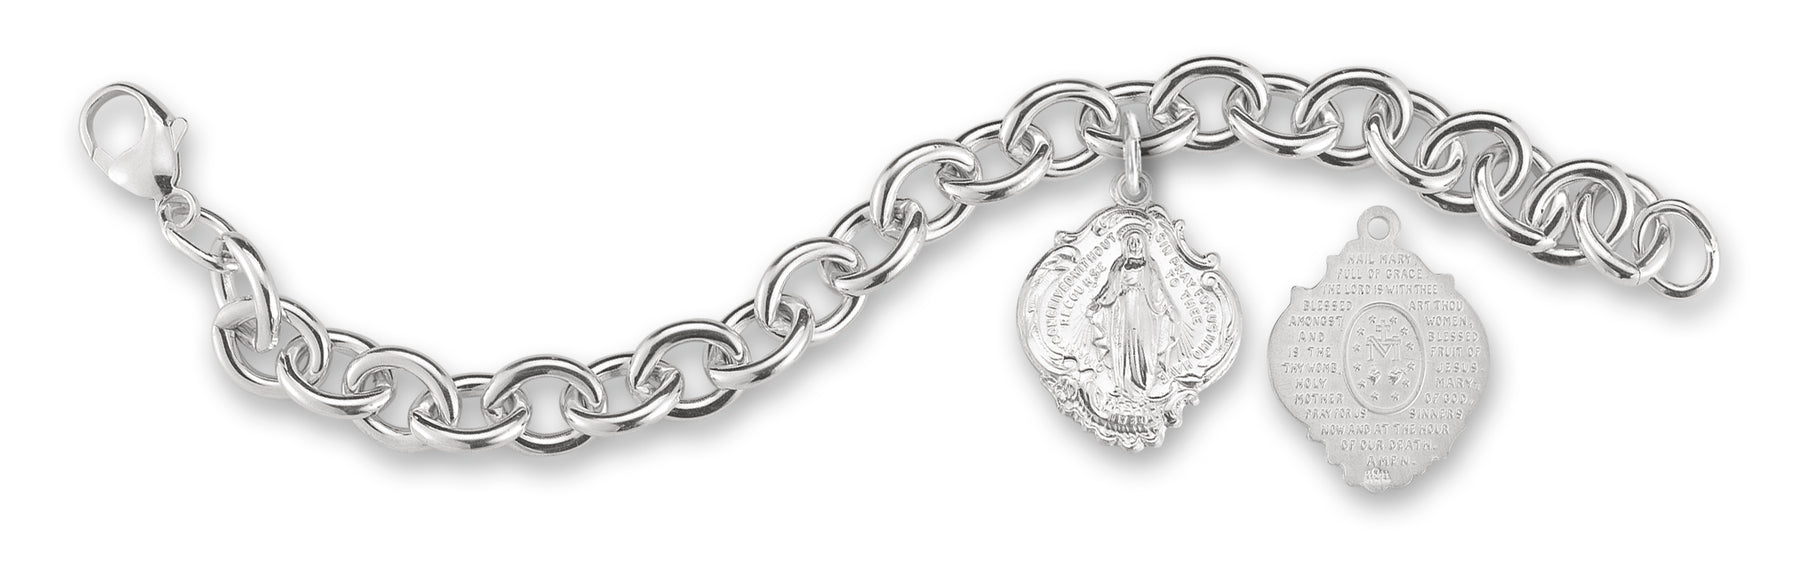 Extra Heavy Solid Sterling Silver Link Style Bracelet with hail Mary Miraculous Charm